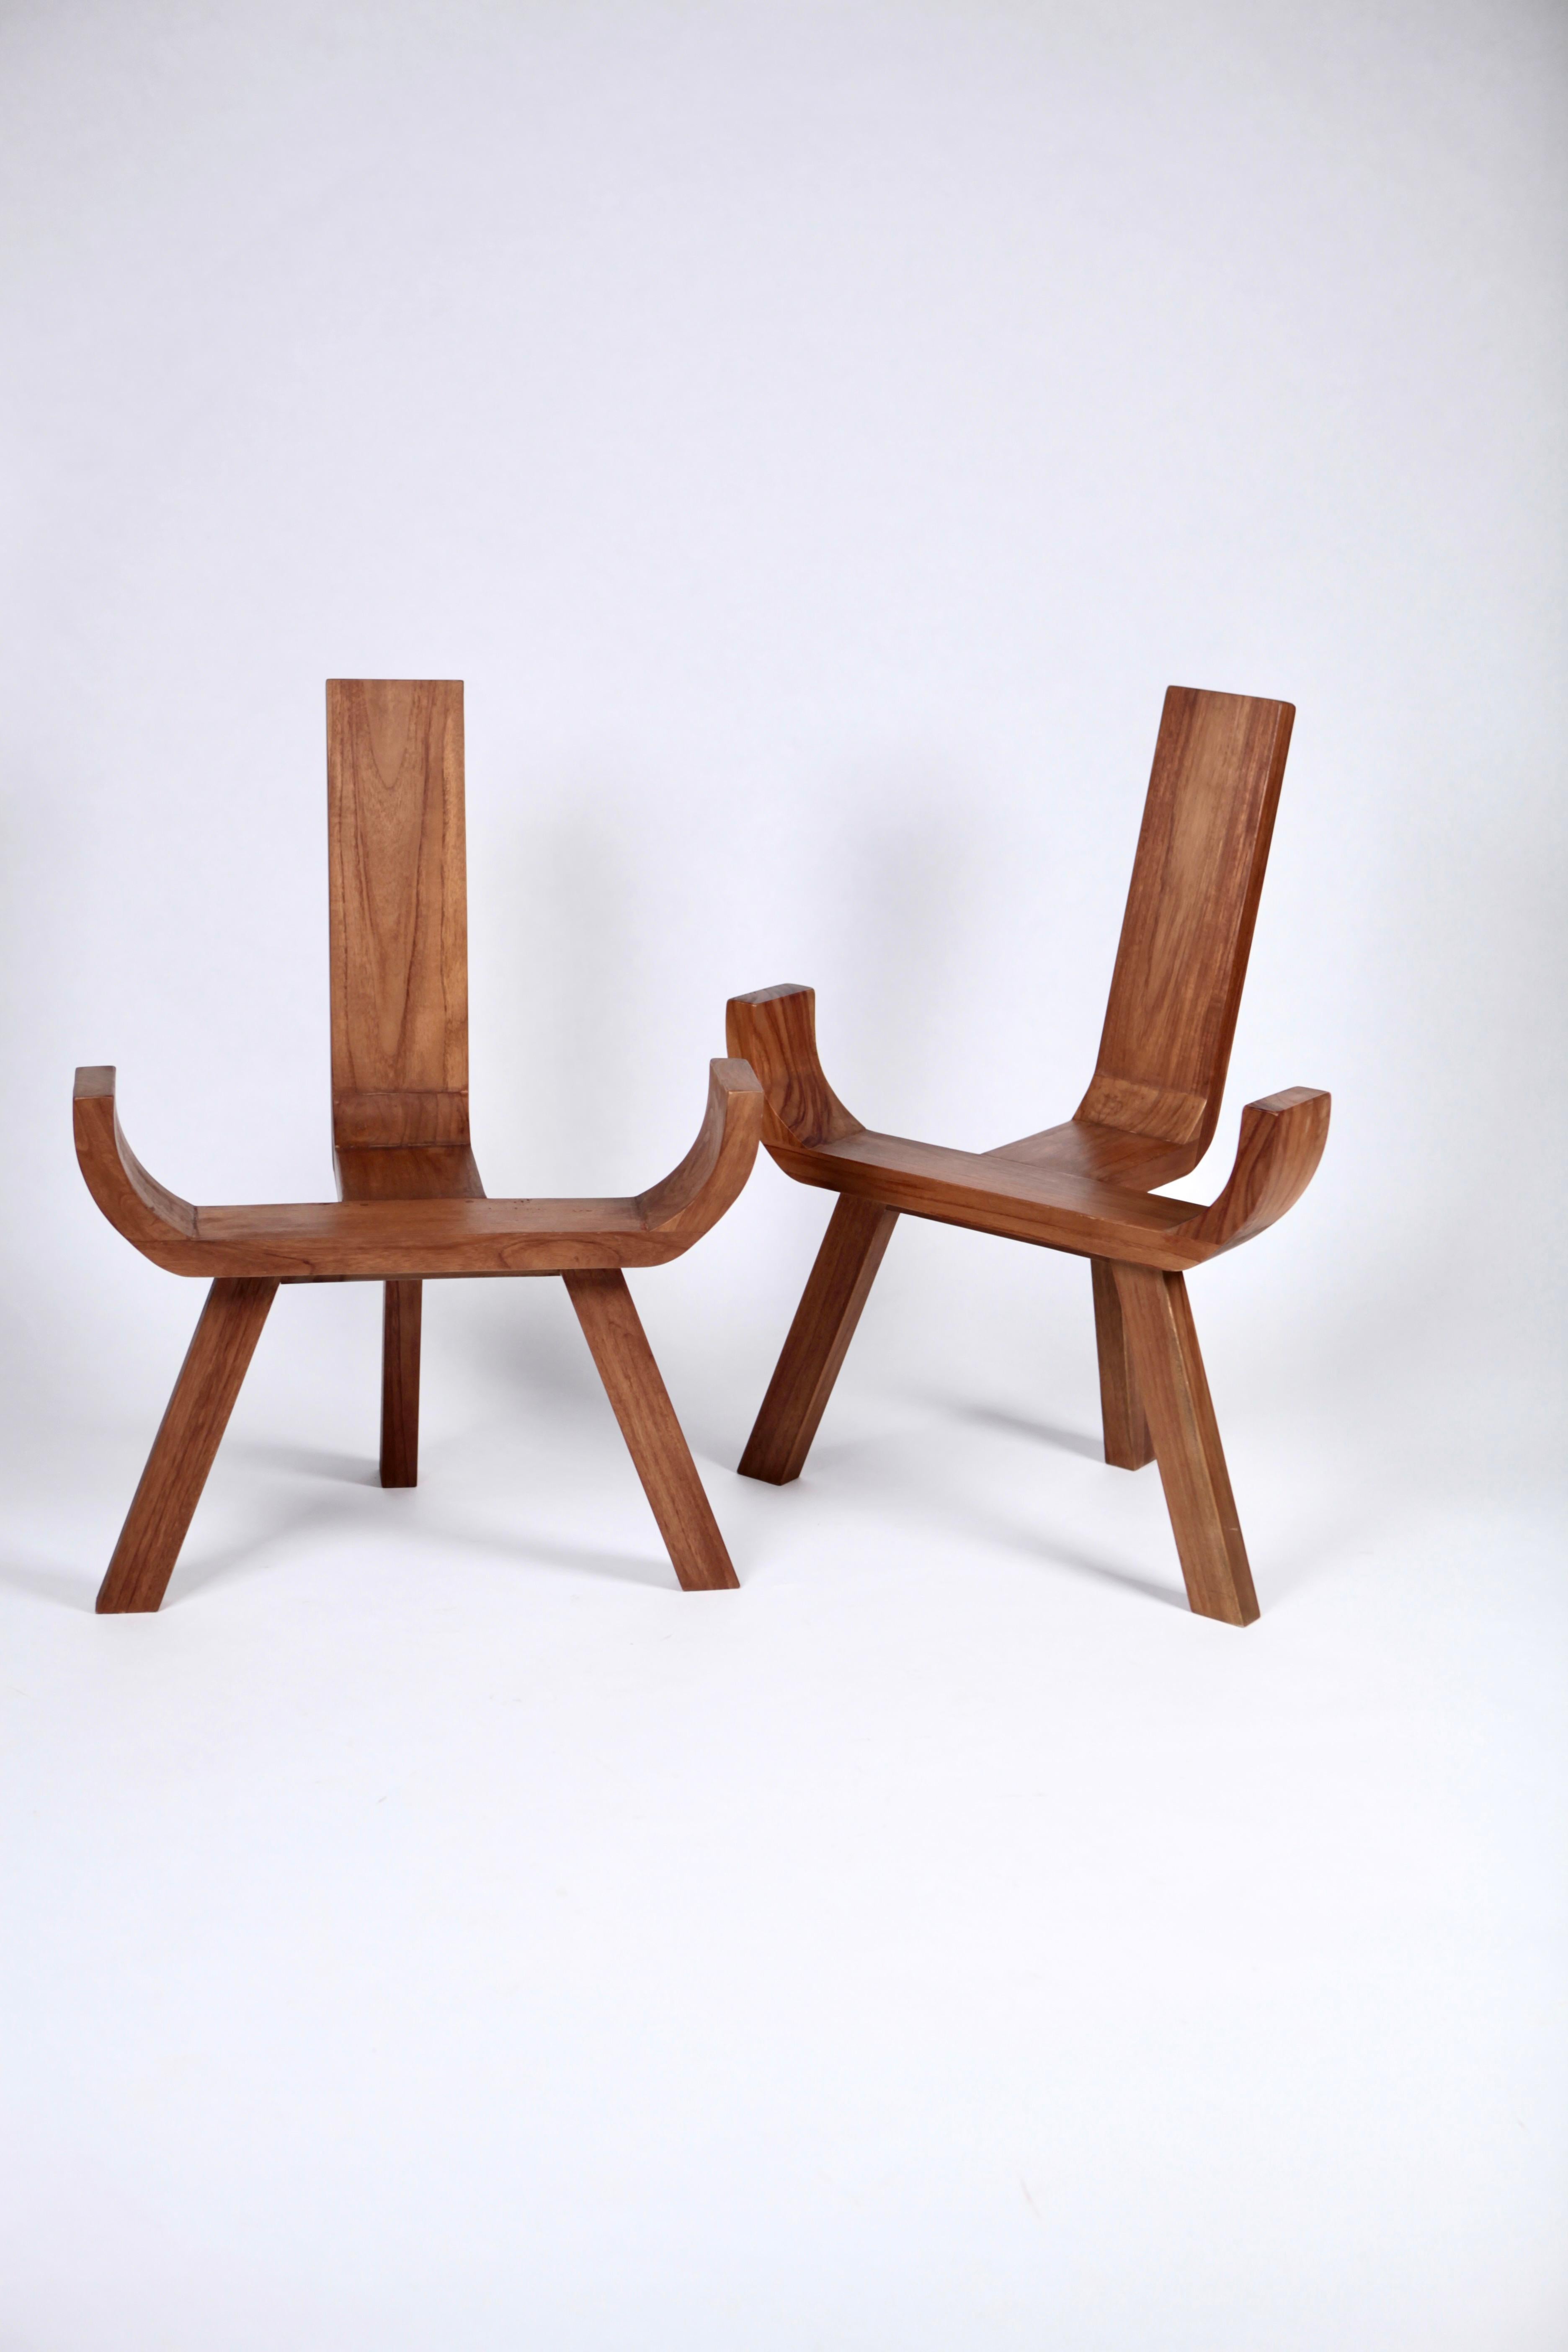 Sculptural Danish Easy Chairs, Solid Teak, 1960s For Sale 1